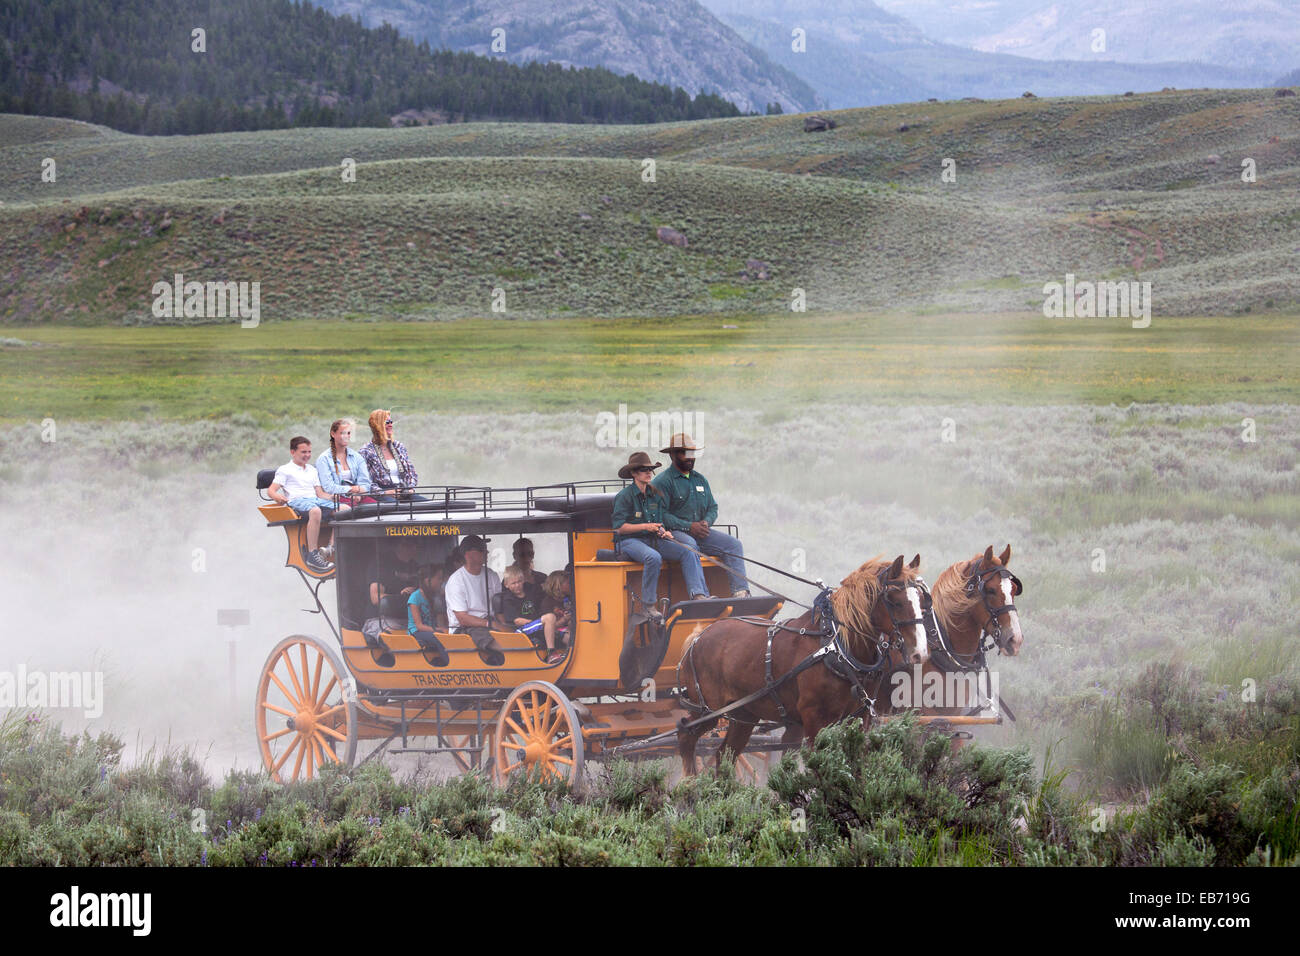 Tourists ride in an old fashion western stagecoach from Roosevelt Lodge at Yellowstone National Park July 3, 2014 in Wyoming. Stock Photo